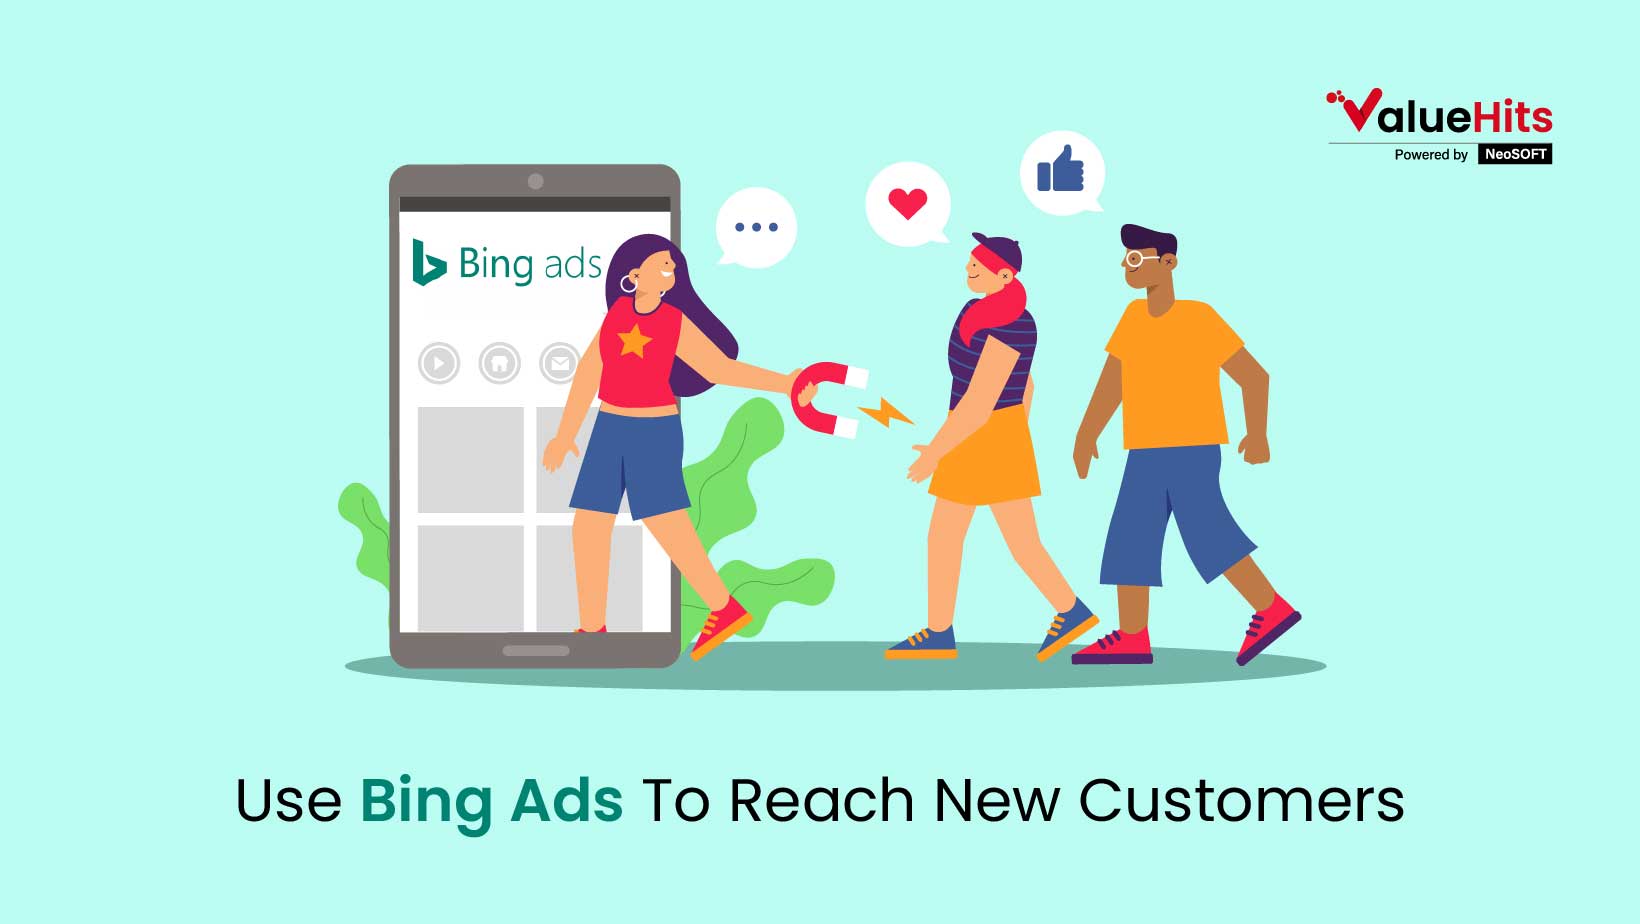 Use Bing Ads To Reach New Customers